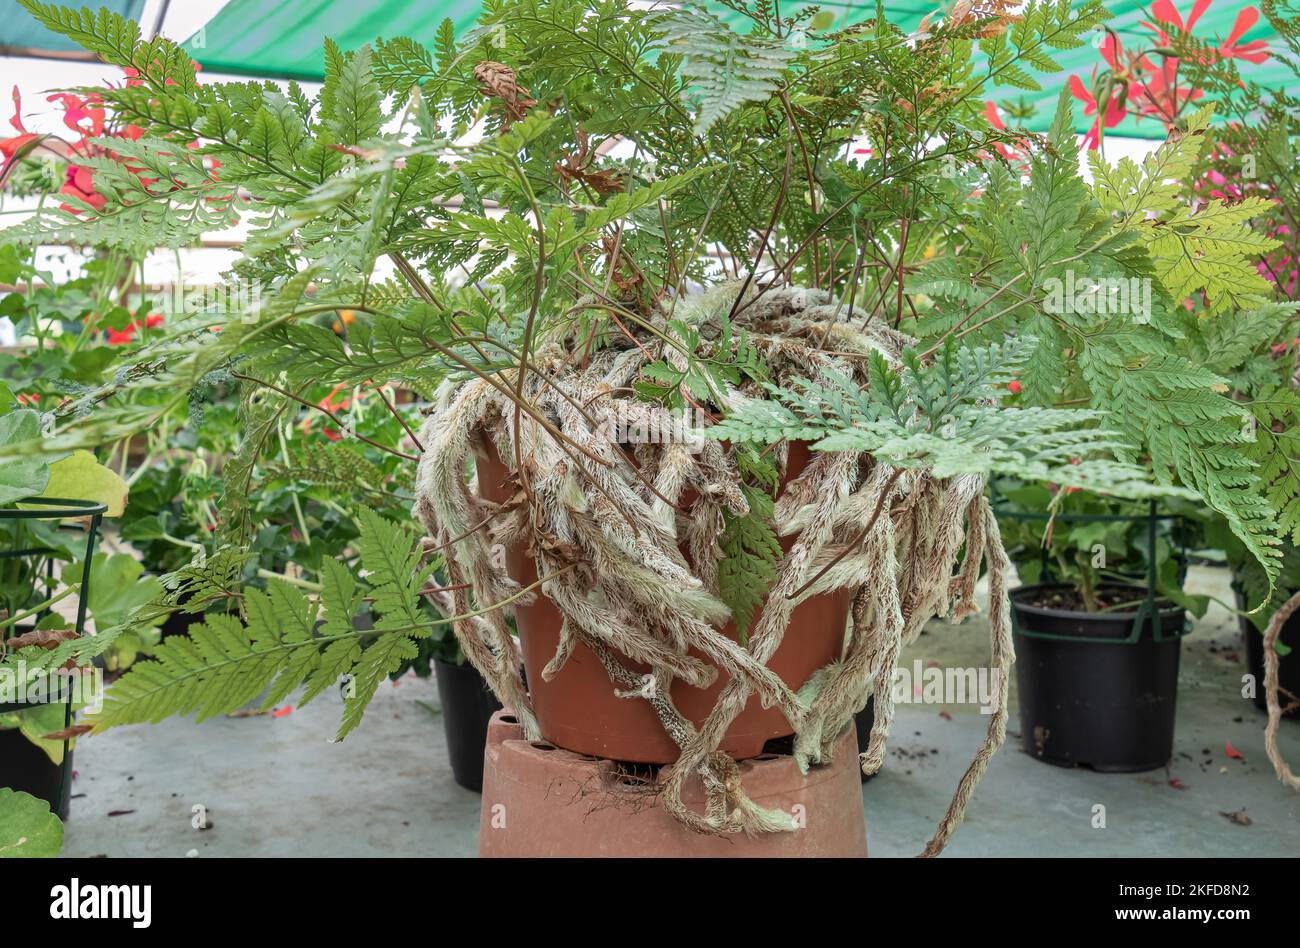 Fern plant davallia canariensis grow in pot indoor greenhouse with hairy roots in close up view with daylight Stock Photo